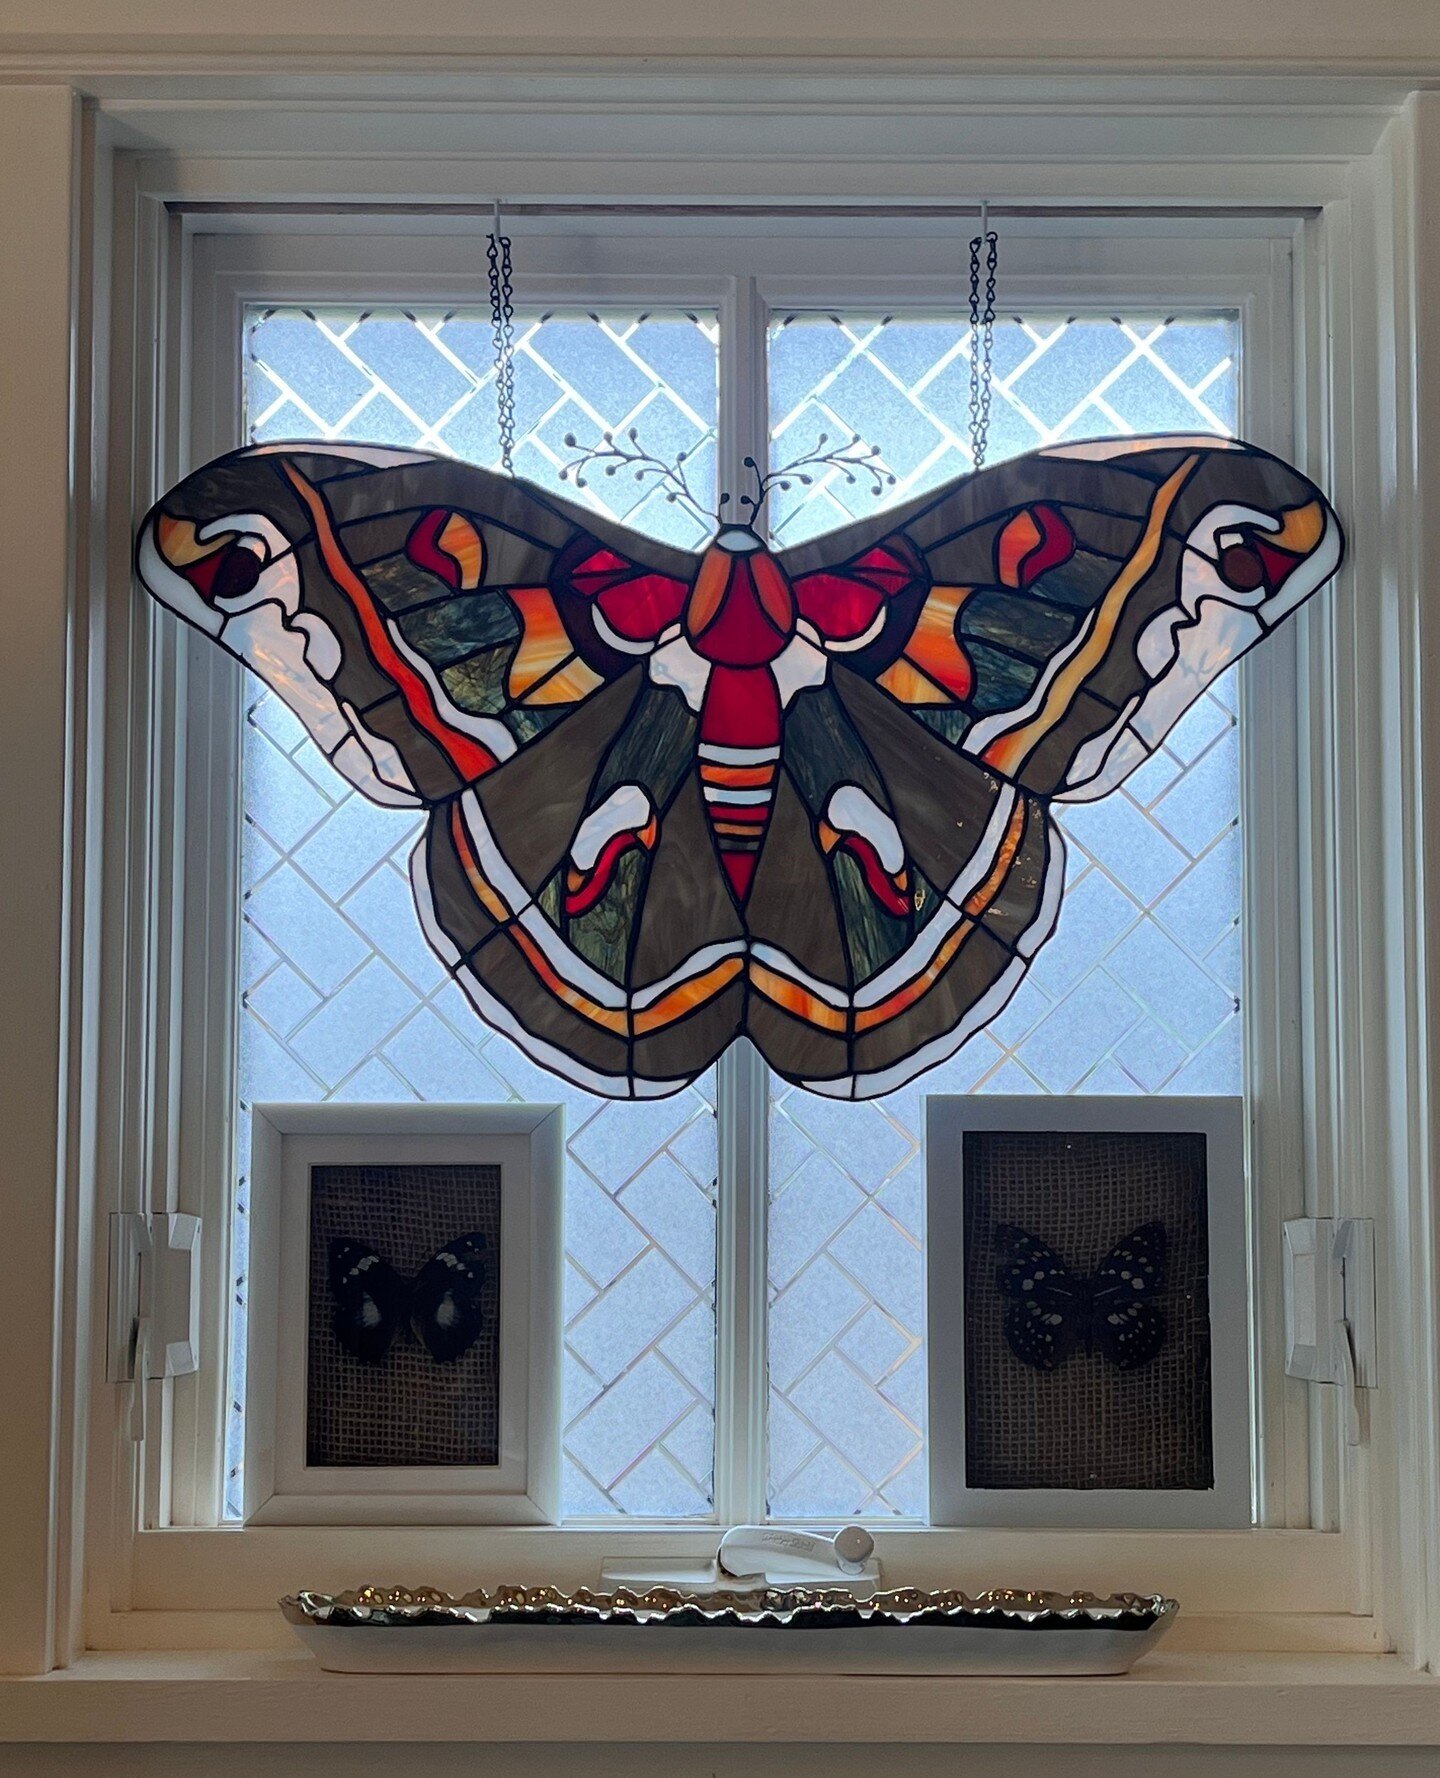 look at this 🦋 stained glass⁠
⁠
Love it!